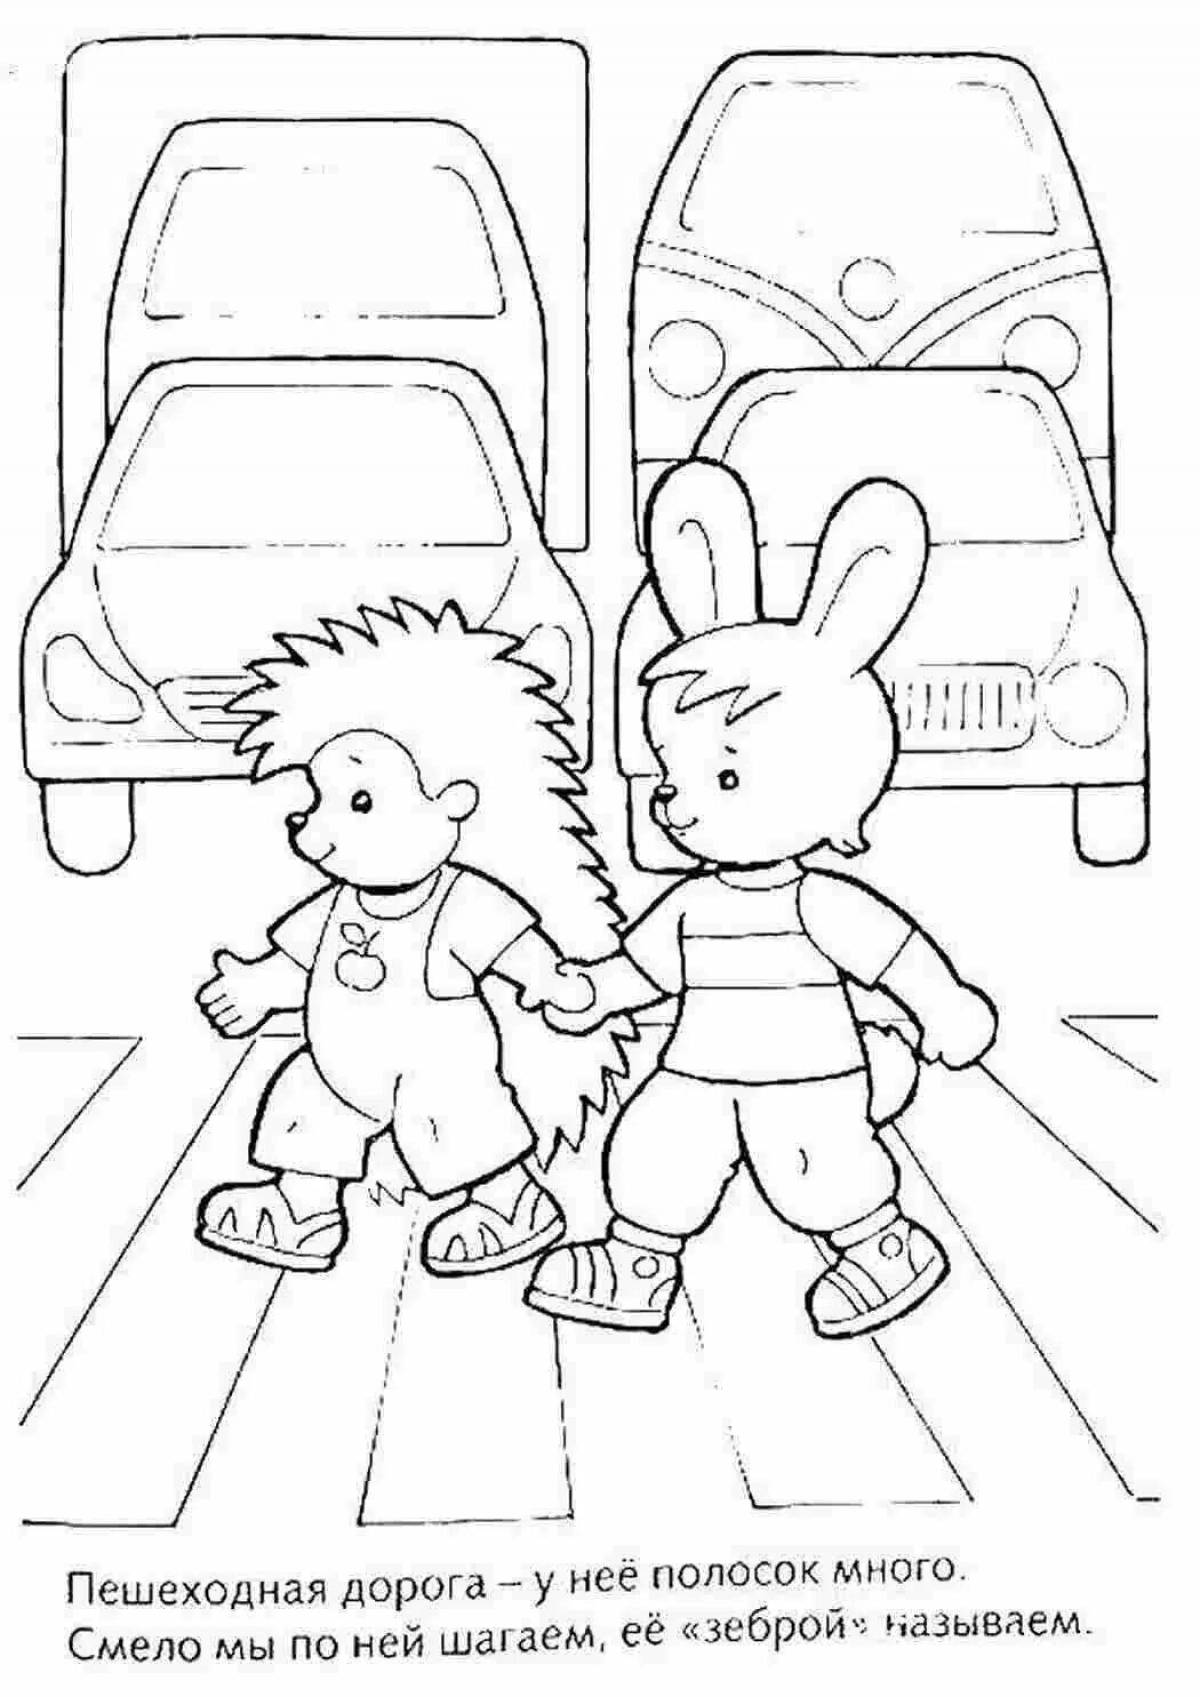 Playful traffic rules coloring pages for kids